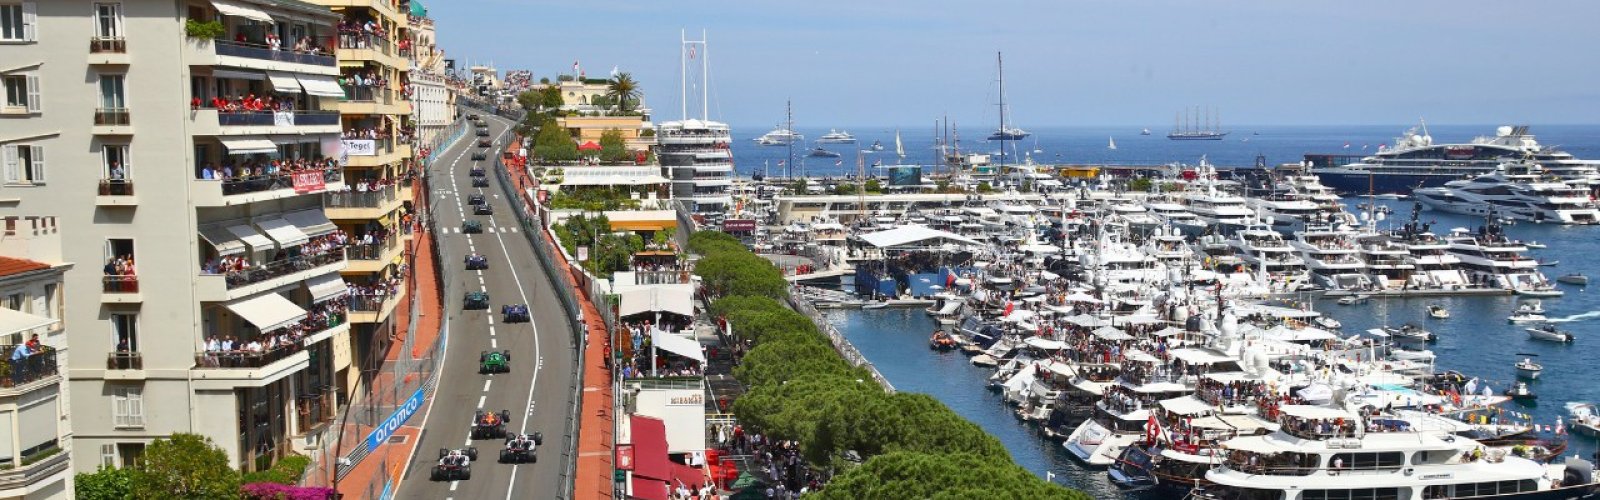 Monaco Formula 1 Grand Prix ticket package for F1 fans to experience the pinnacle of motorsport - Circuit de Monaco image